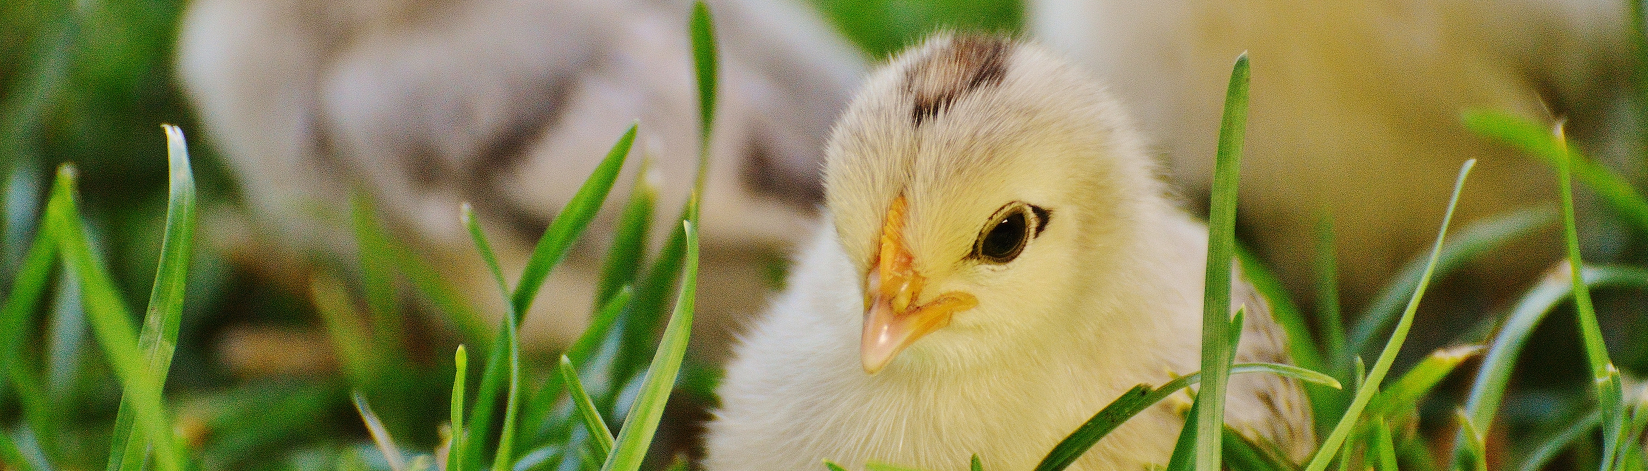 Chick in grass